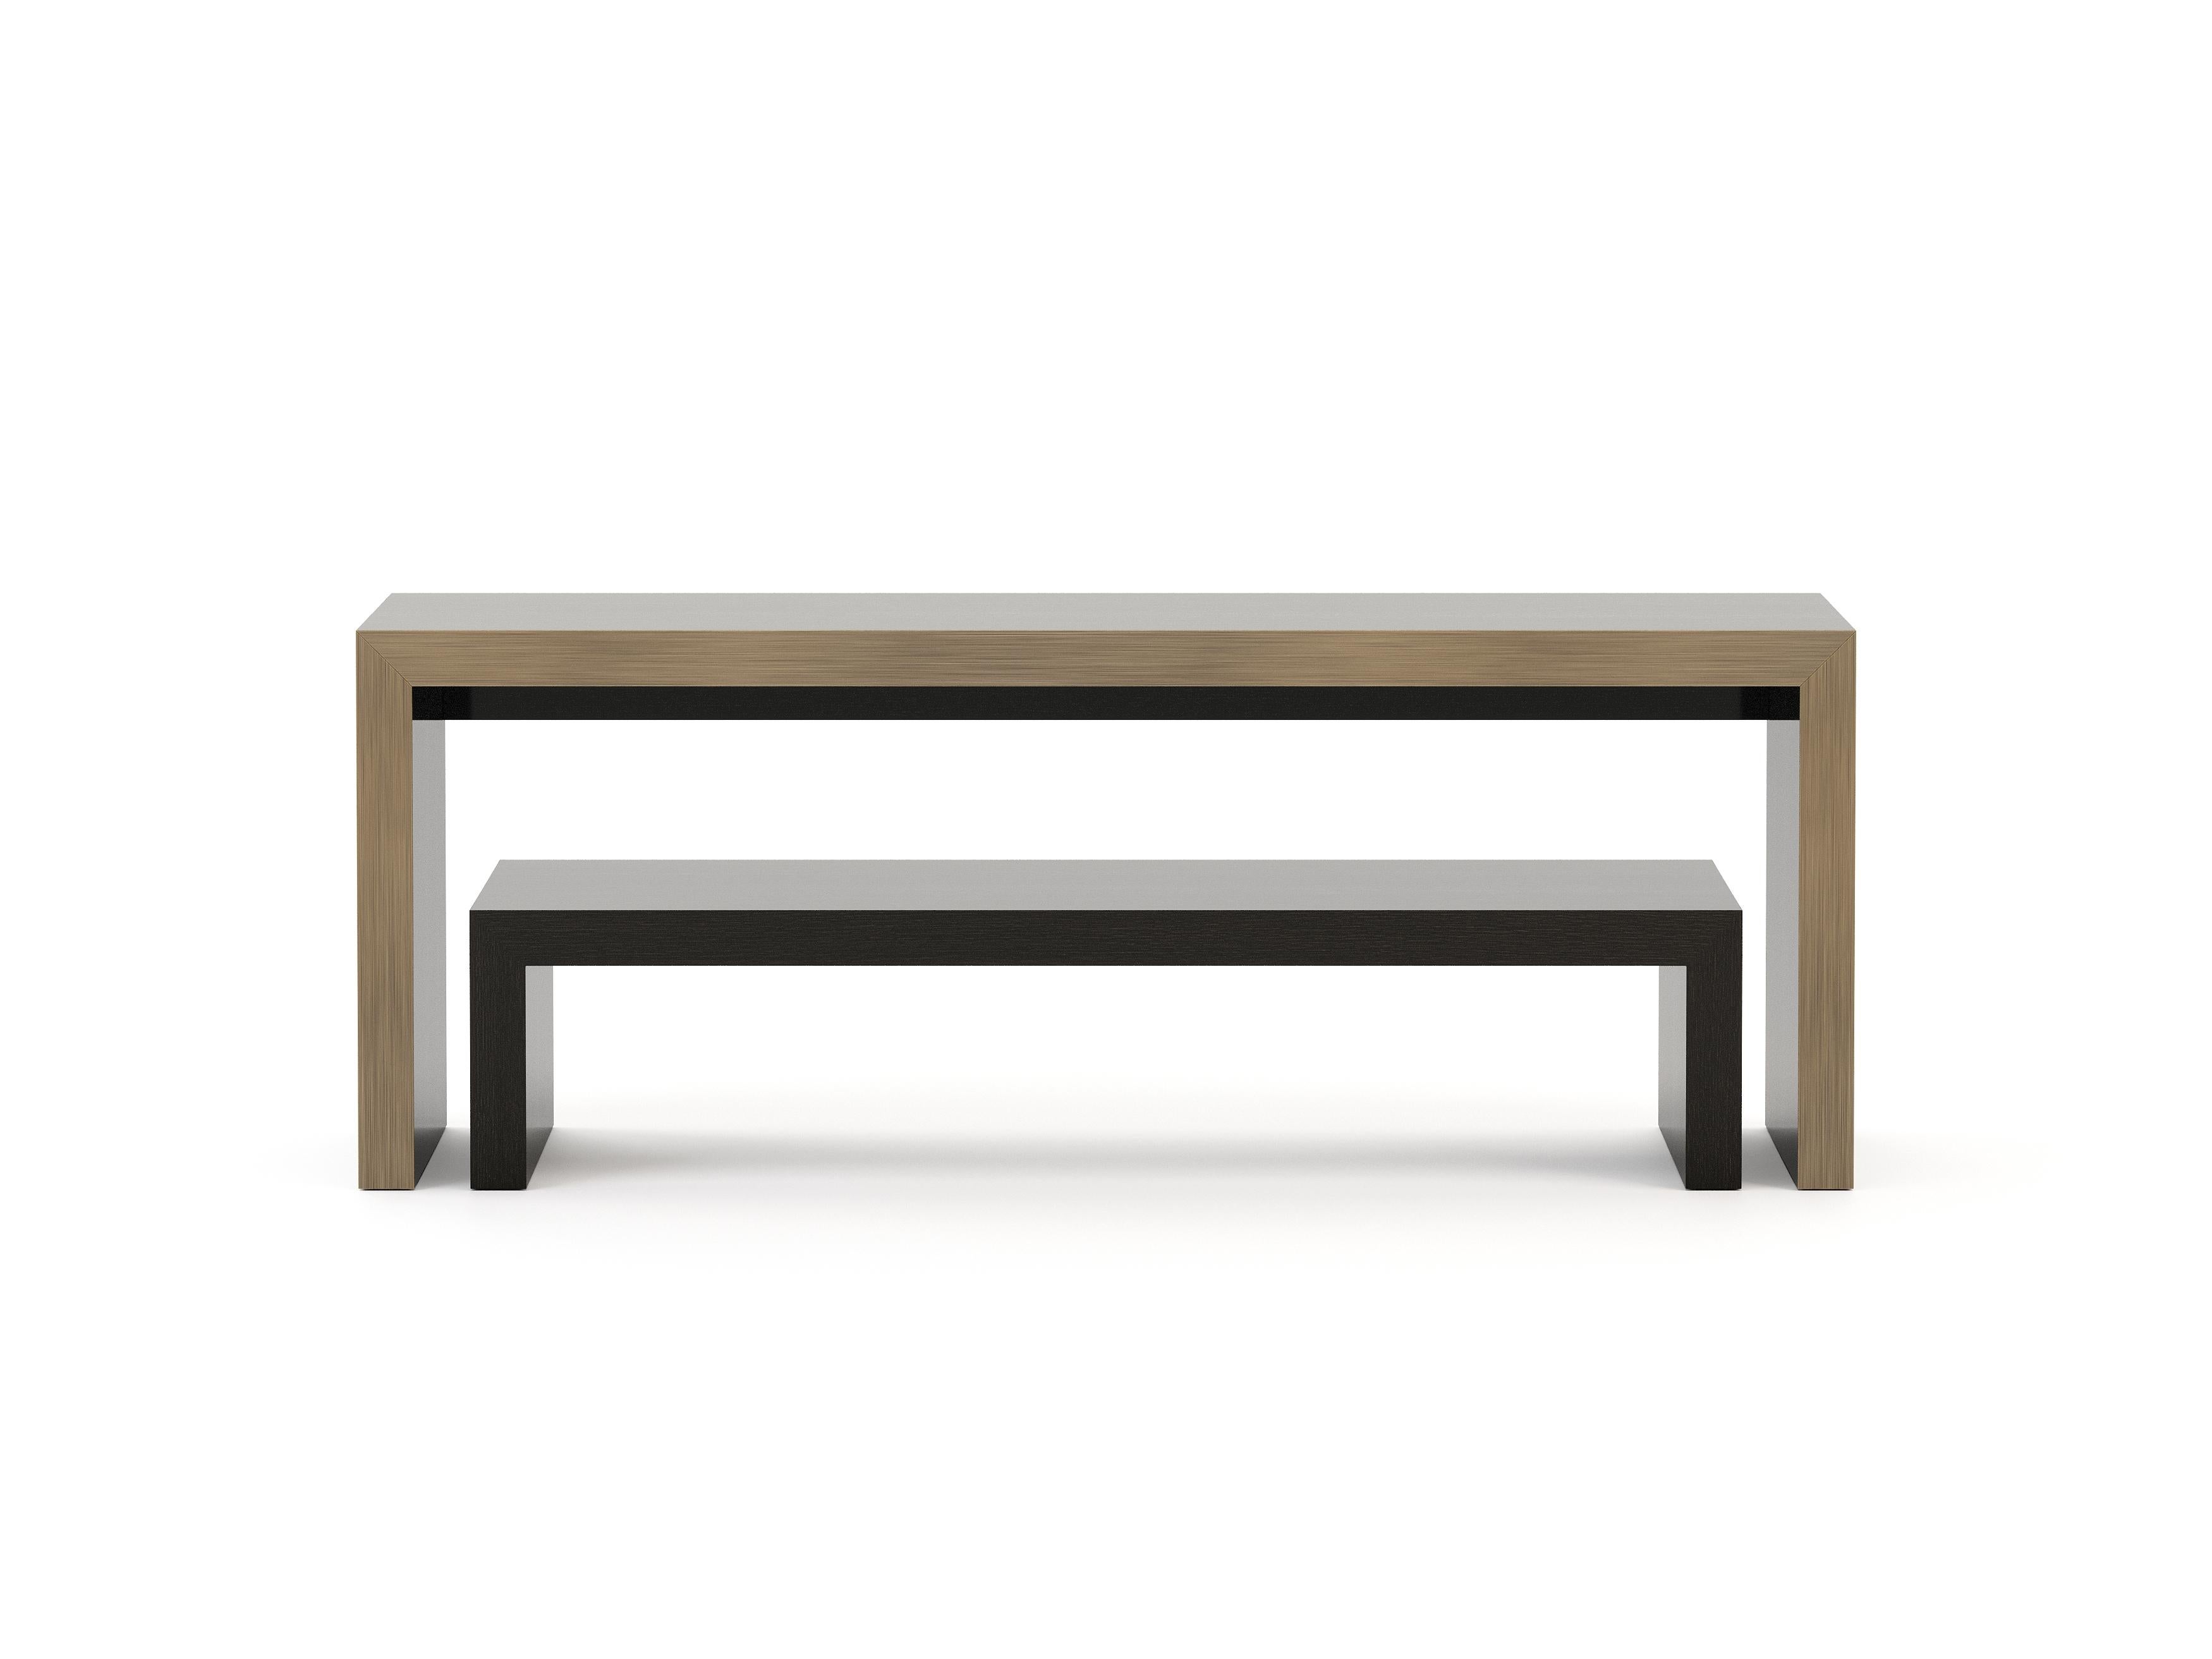 Measurement units

High Table – D 42 x W 160 x H 60 cm
Lower Table – D 42 x W 136 x H 30 cm

Inspired by the golden bridge itself, this collection was carefully planned to include simple elements in order to create an idyllic setting. The pieces in